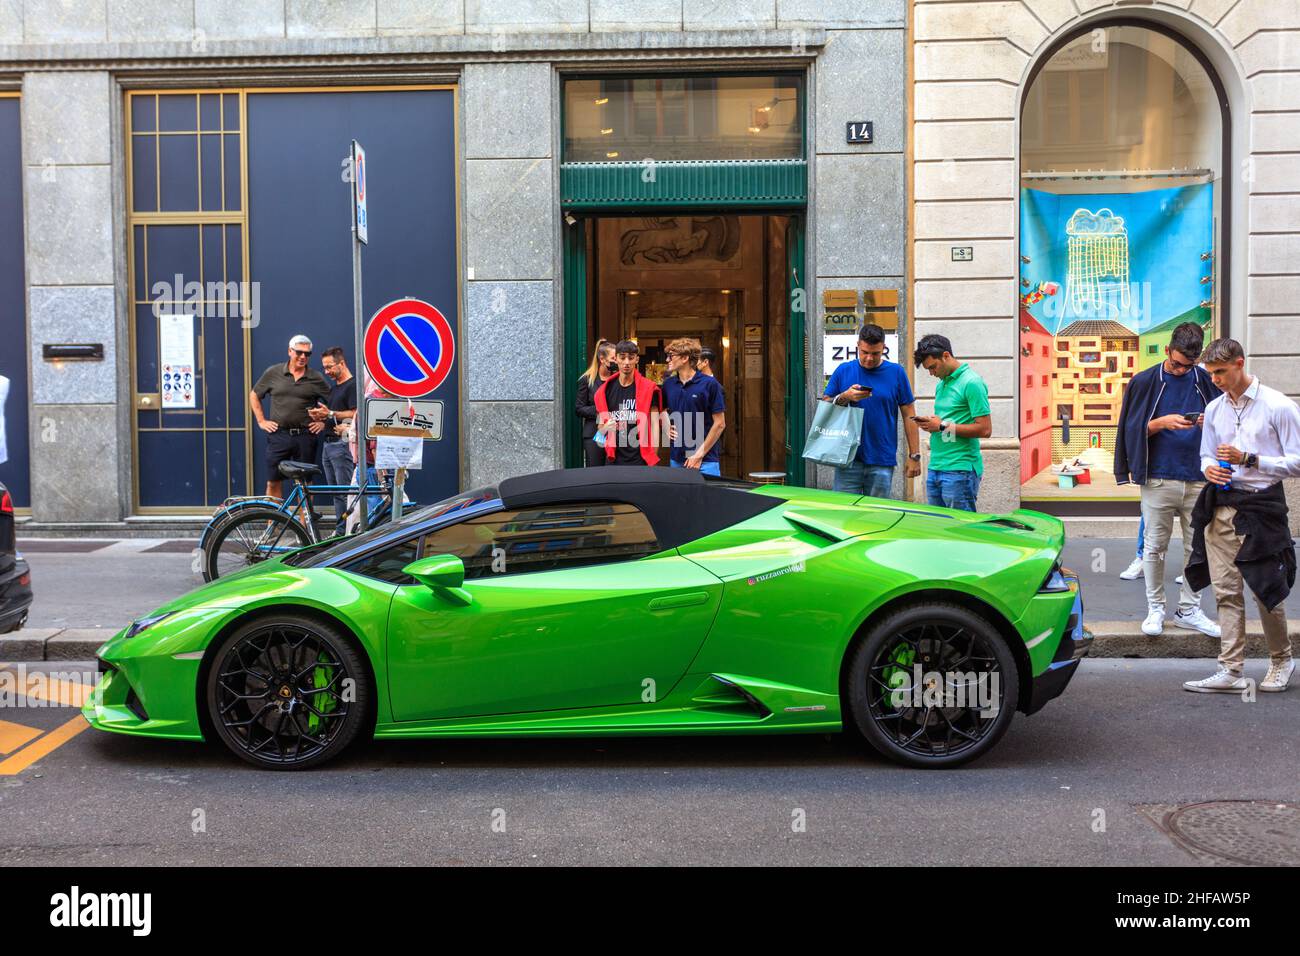 A green Lamborghini sports car parked in the fashion district Monte Napoleone of Milan, Italy. Stock Photo